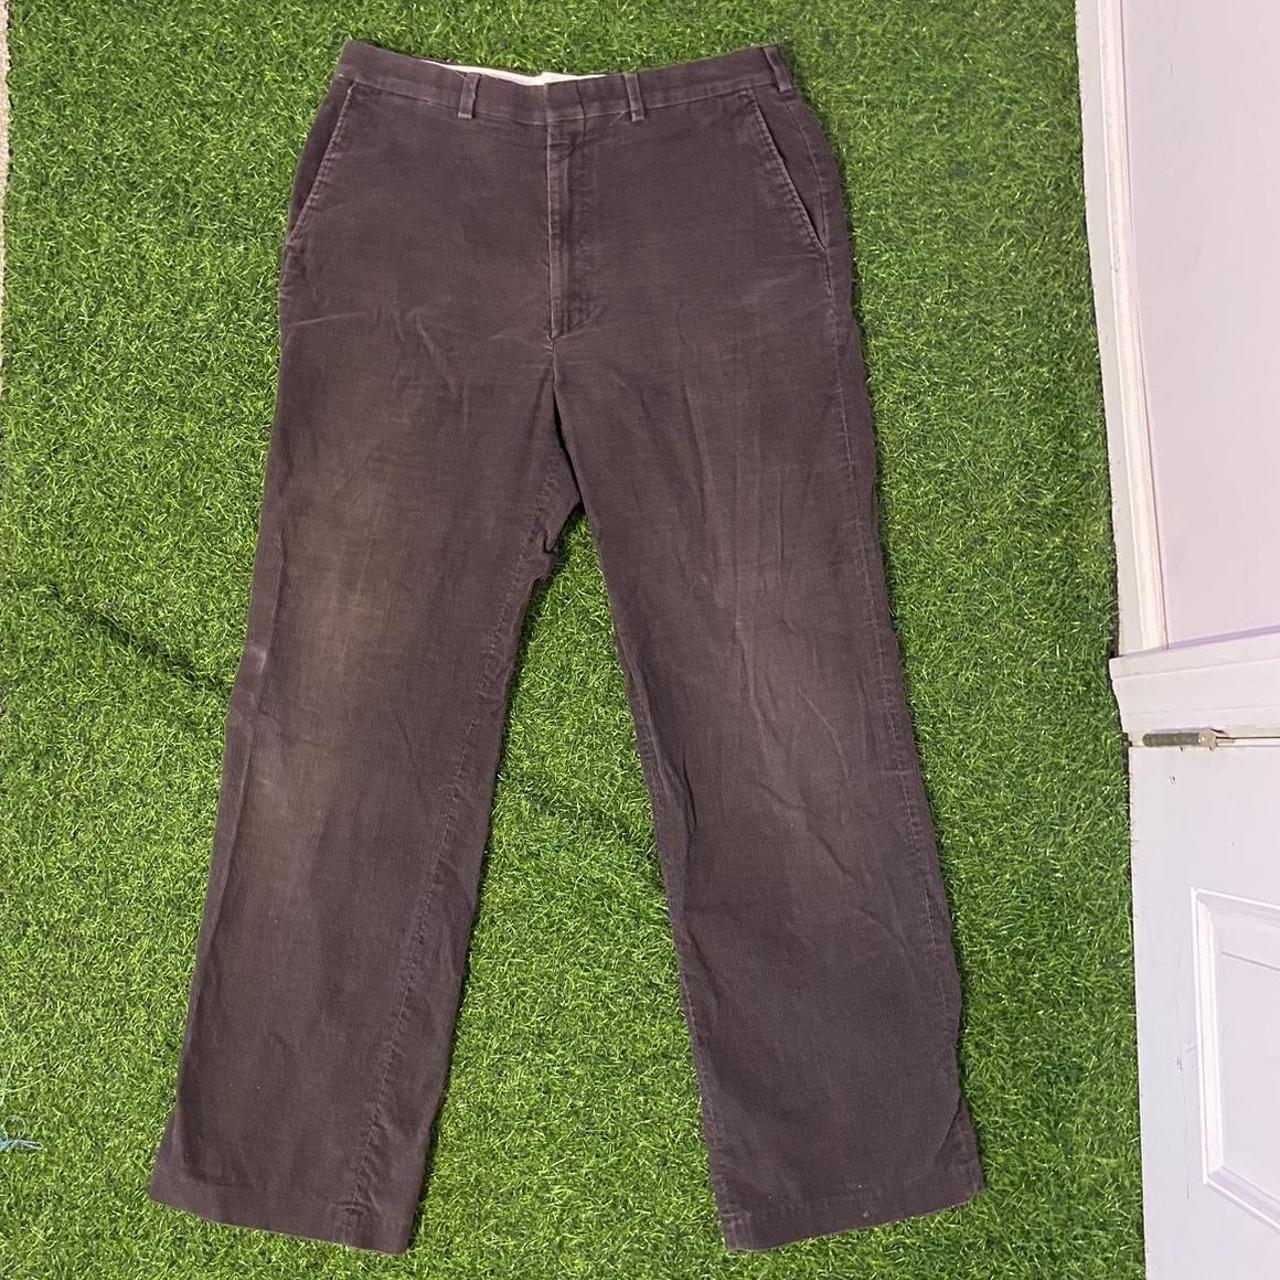 dark grey corduroy pants insanely old tags can’t... - Depop